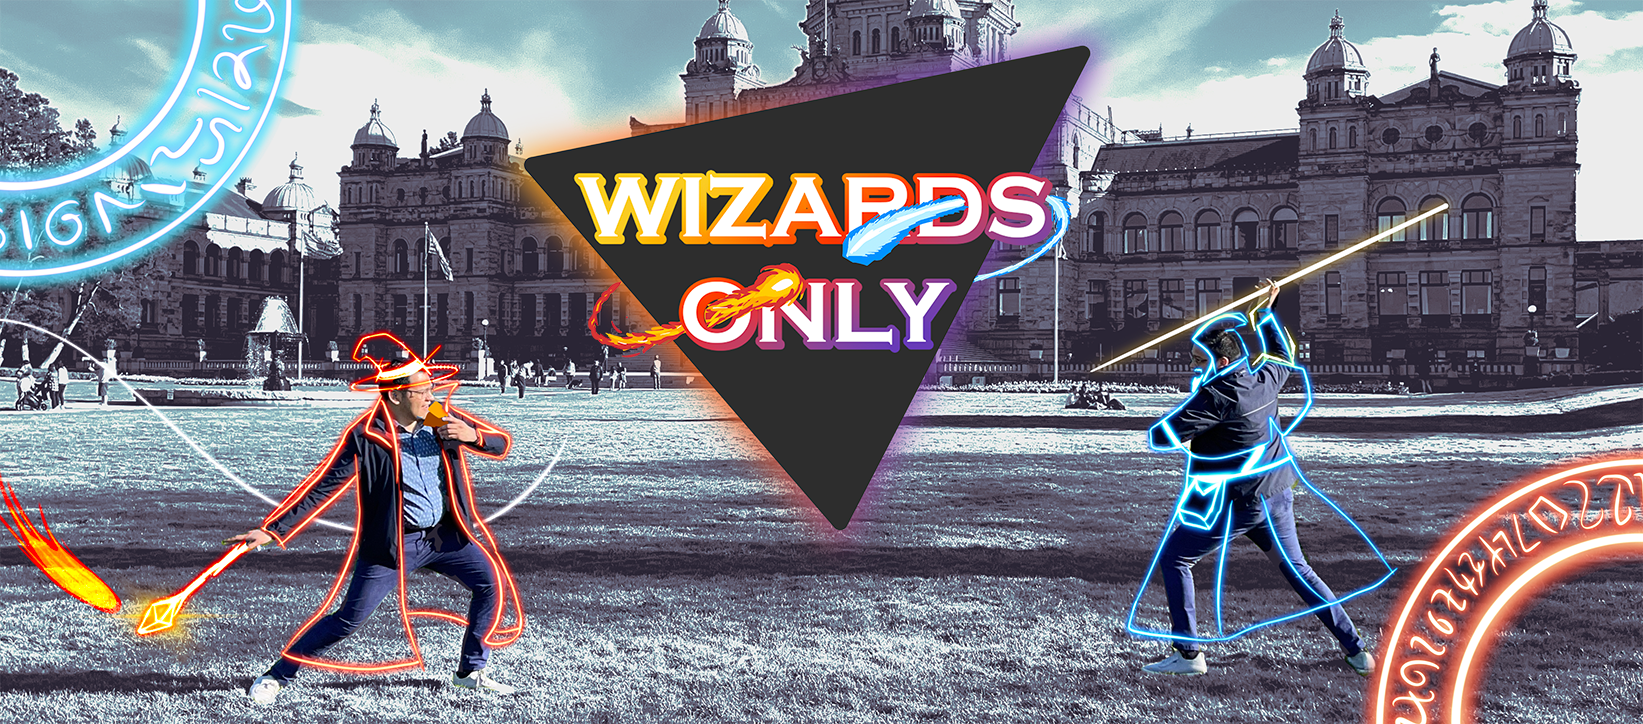 WIZARDS ONLY